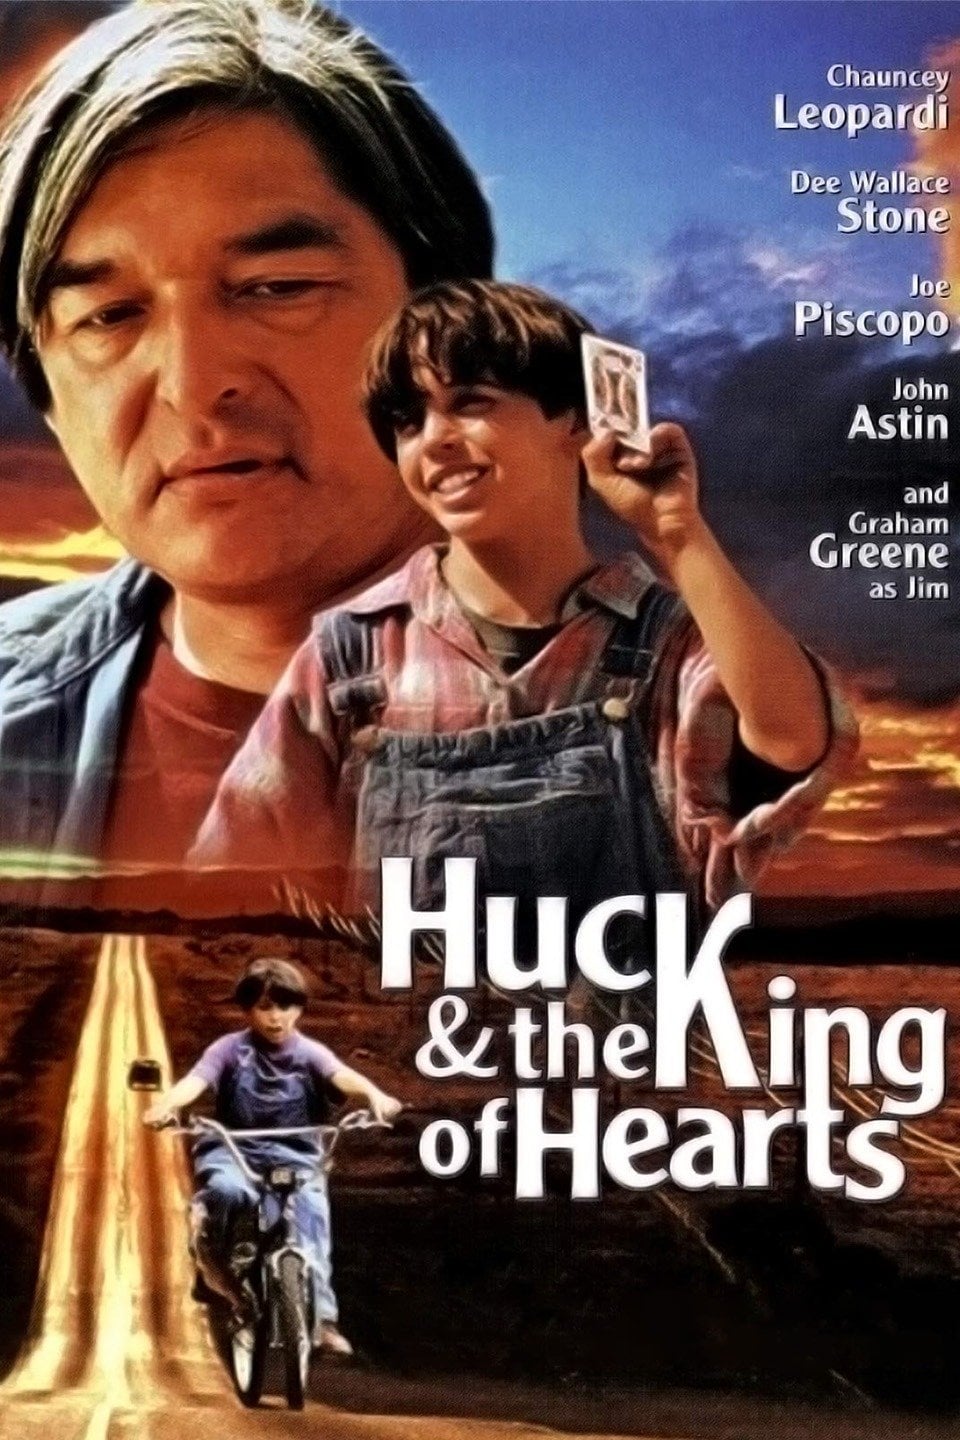 Huck and the King of Hearts (1994)